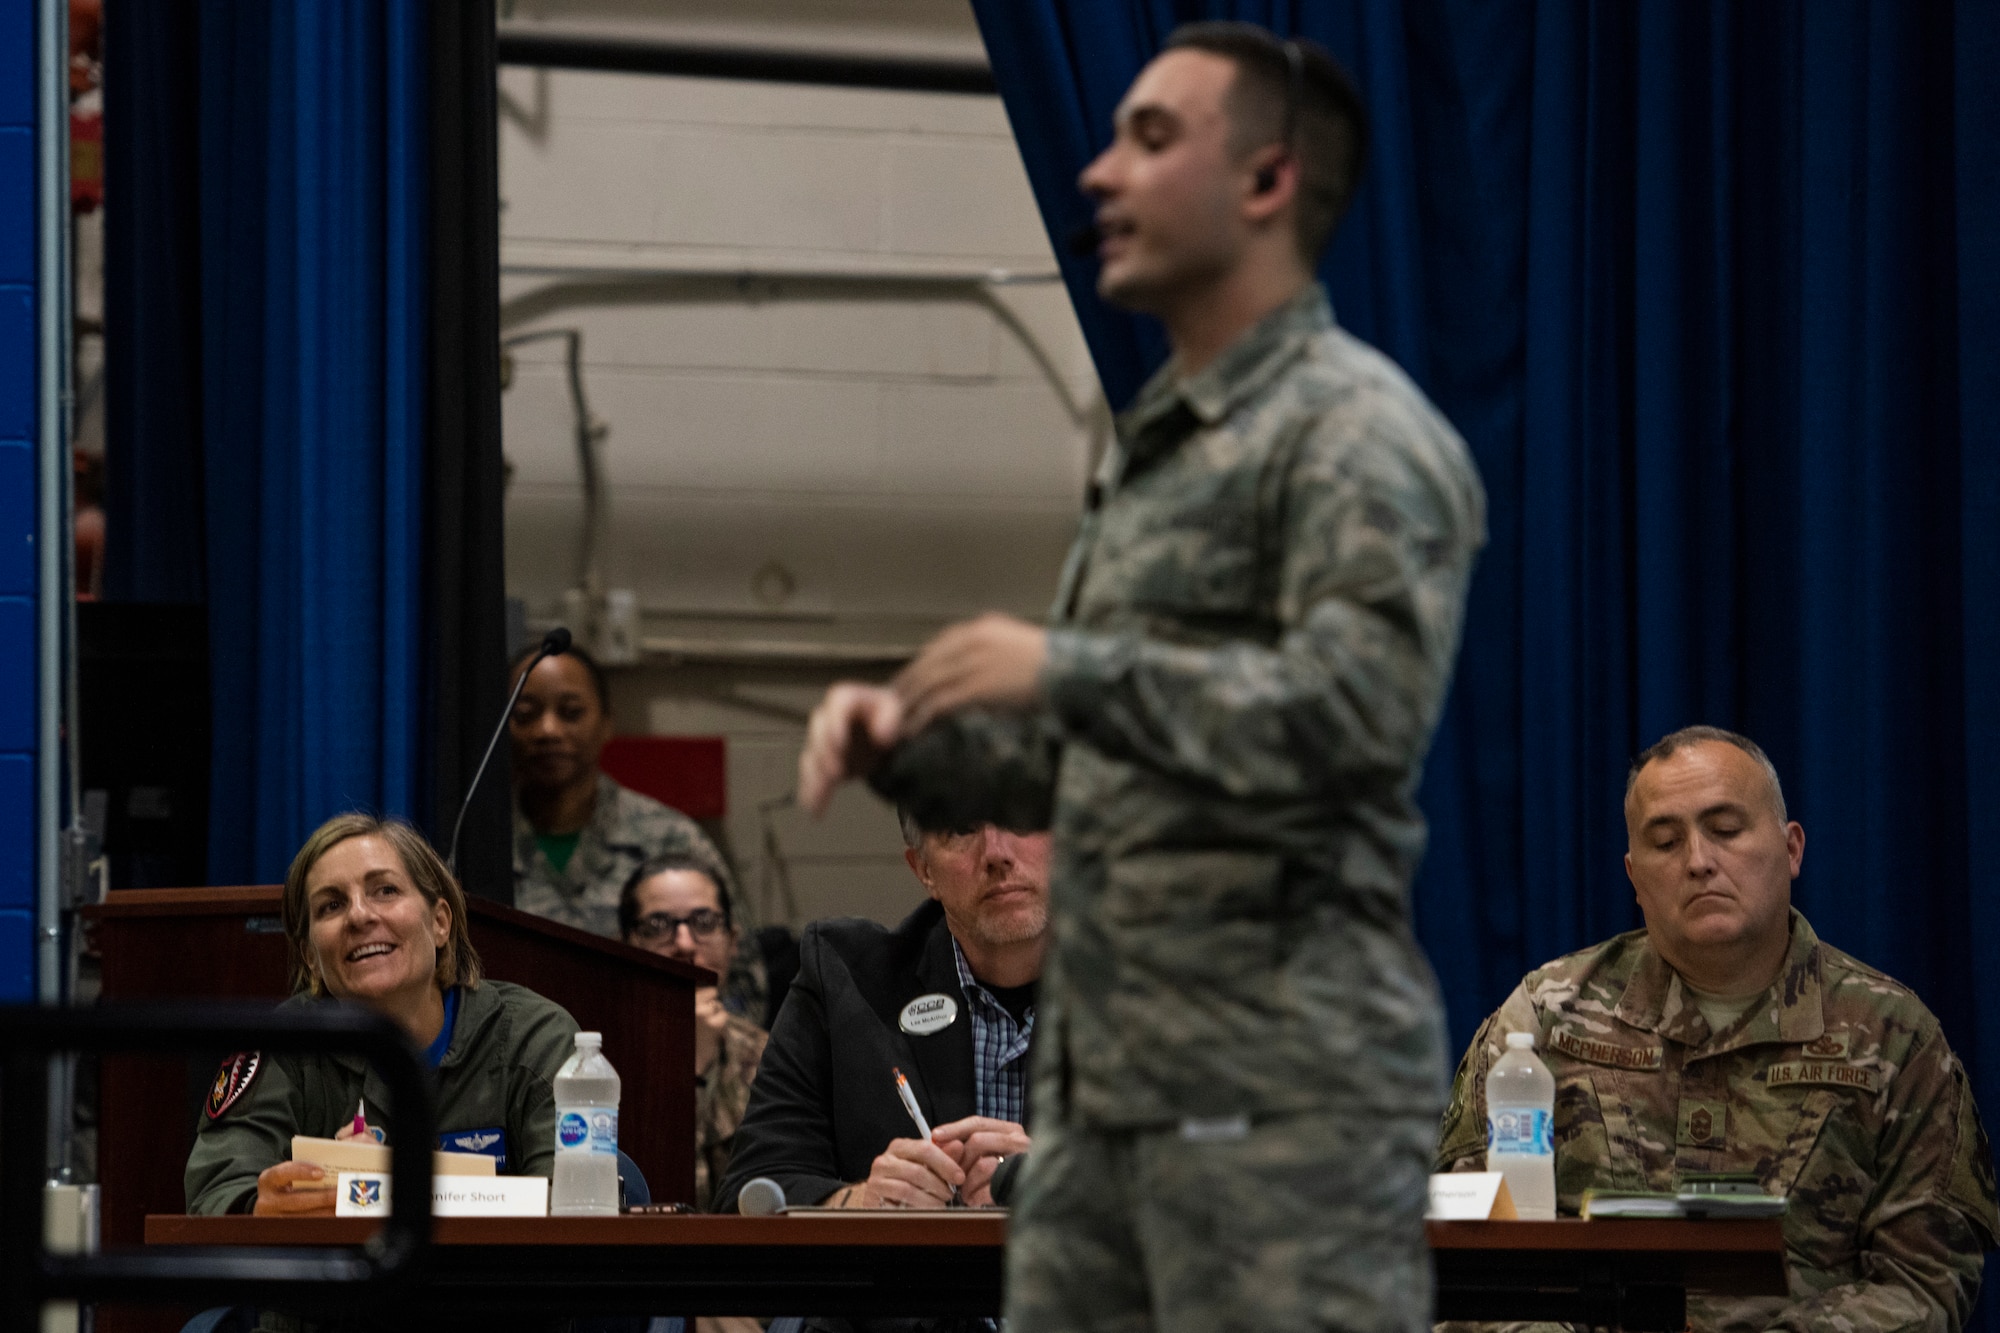 Judges listen as a contestant presents his idea during the second annual Moody Spark Tank competition, May 3, 2019, at Moody Air Force Base, Ga. The competition allows Airmen to showcase their ingenuity by presenting various time and money saving ideas that can benefit the Air Force. (U.S. Air Force photo by Airman 1st Class Joseph P. Leveille)